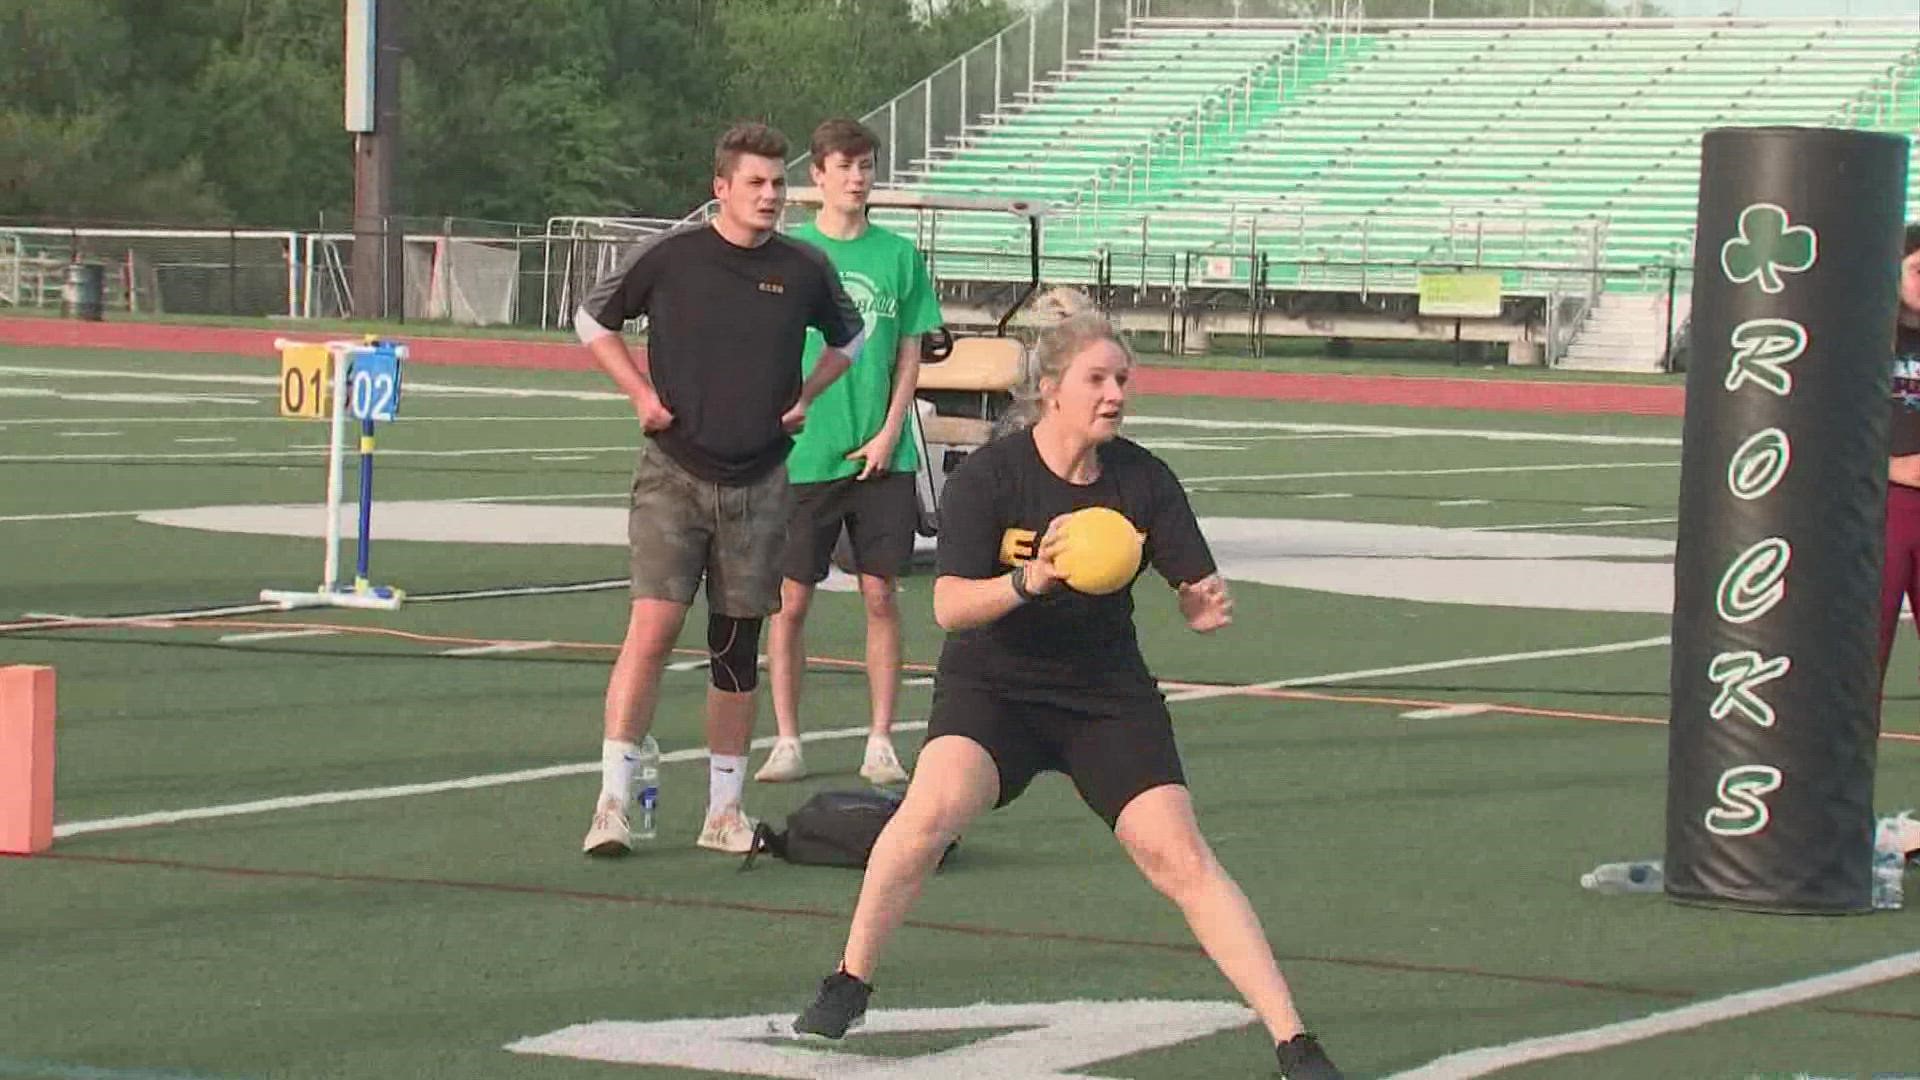 Dublin Coffman High School held the district's 13th annual dodgeball championships Friday night.